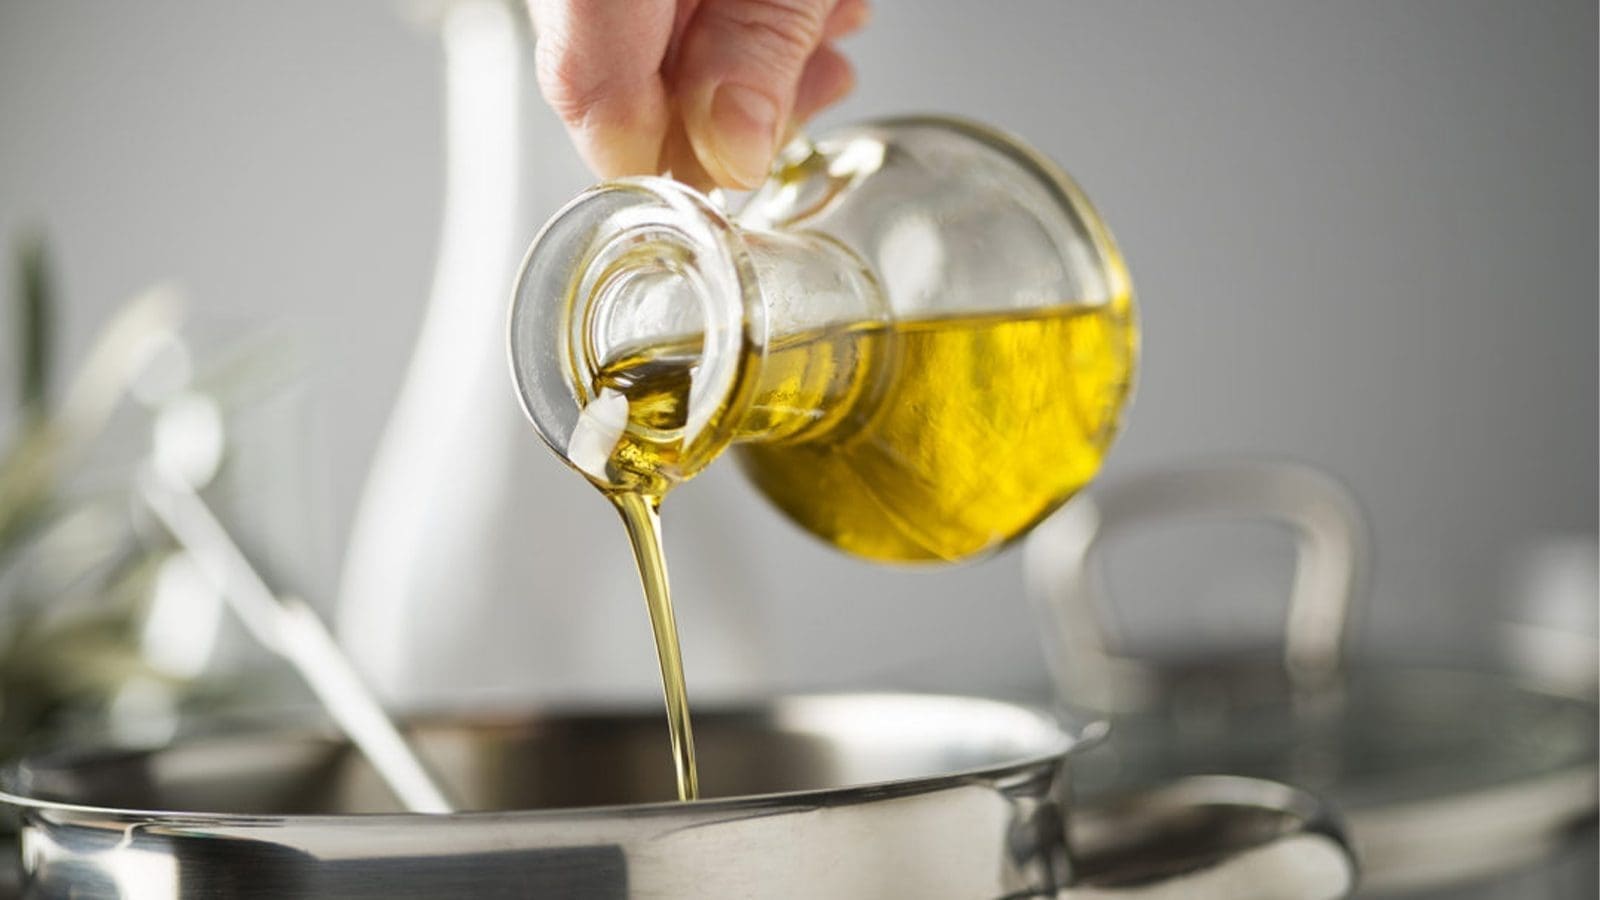 FDA declares partially hydrogenated oils unsafe in foods